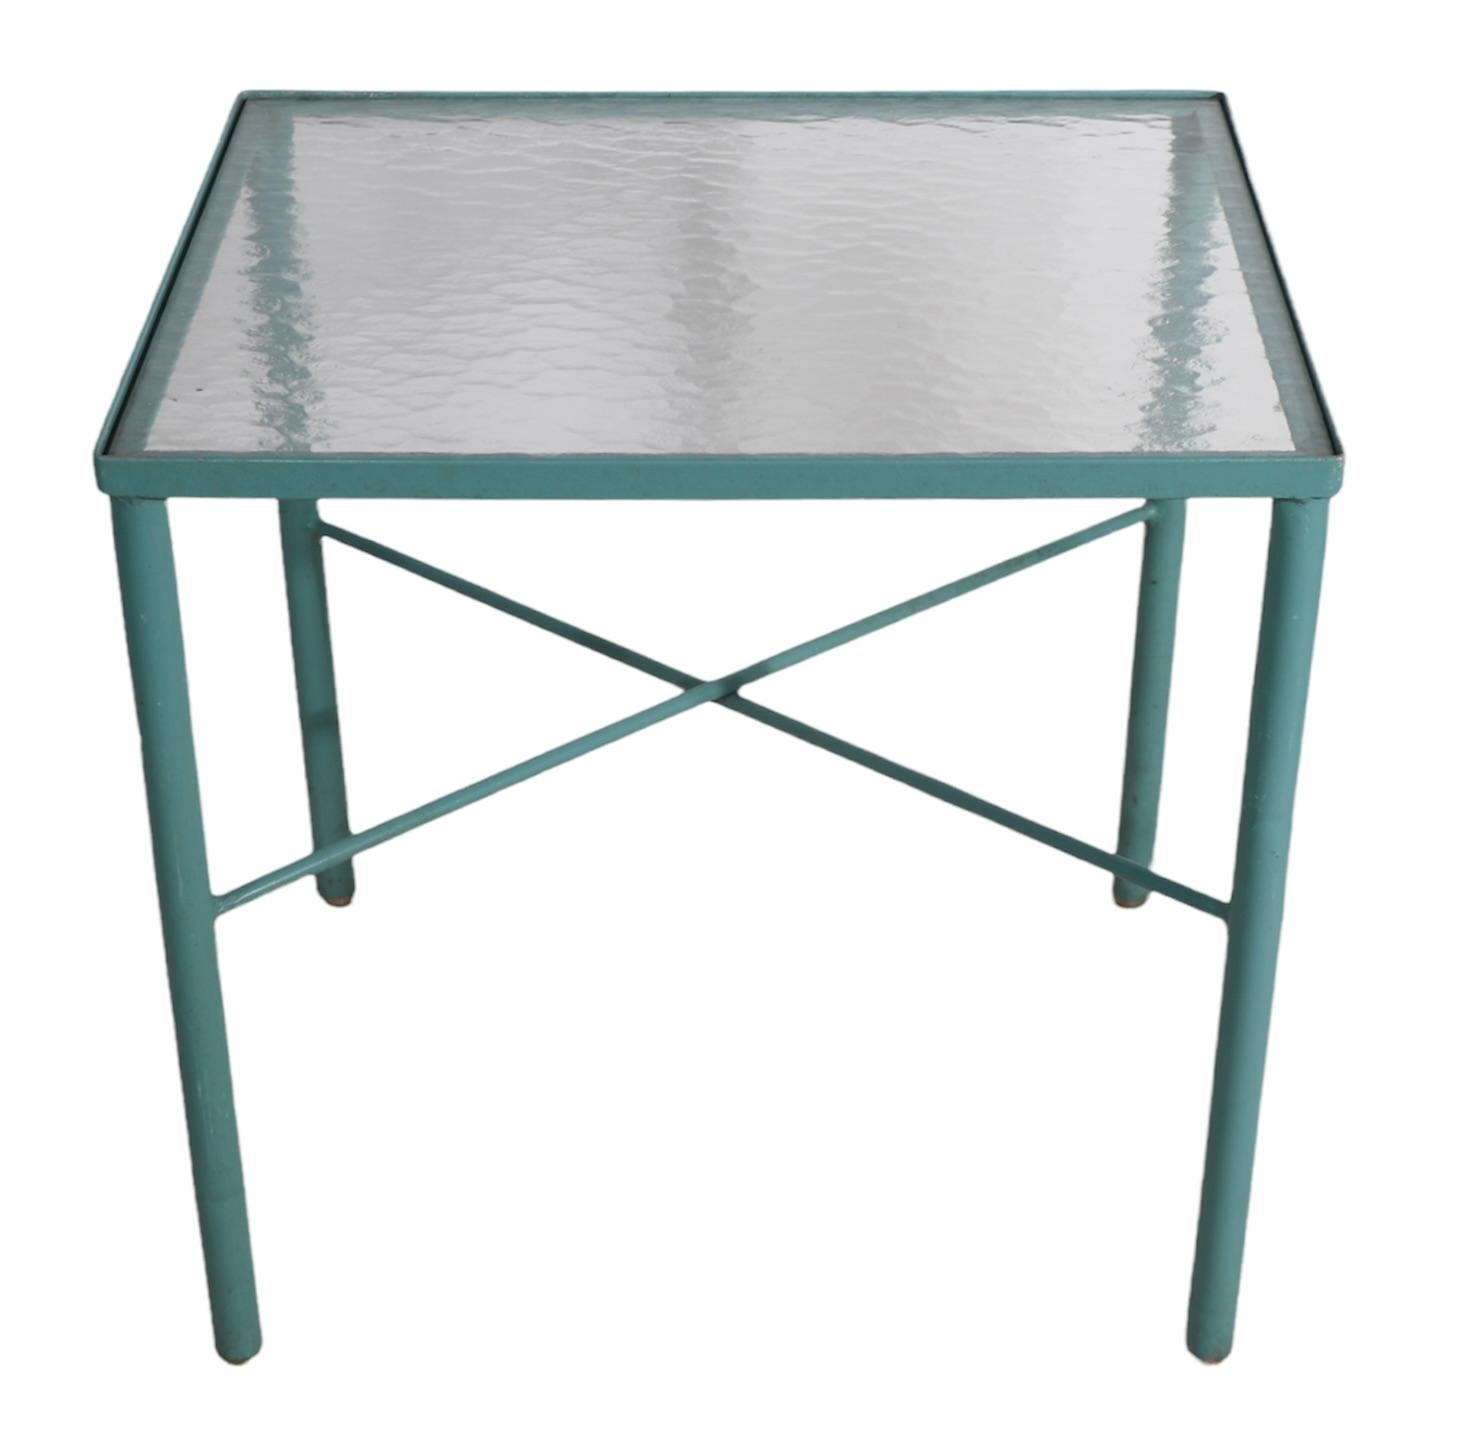 Garden Patio Poolside Table by Hauser Made in USA Ca. 1970's After Brown Jordan In Good Condition For Sale In New York, NY